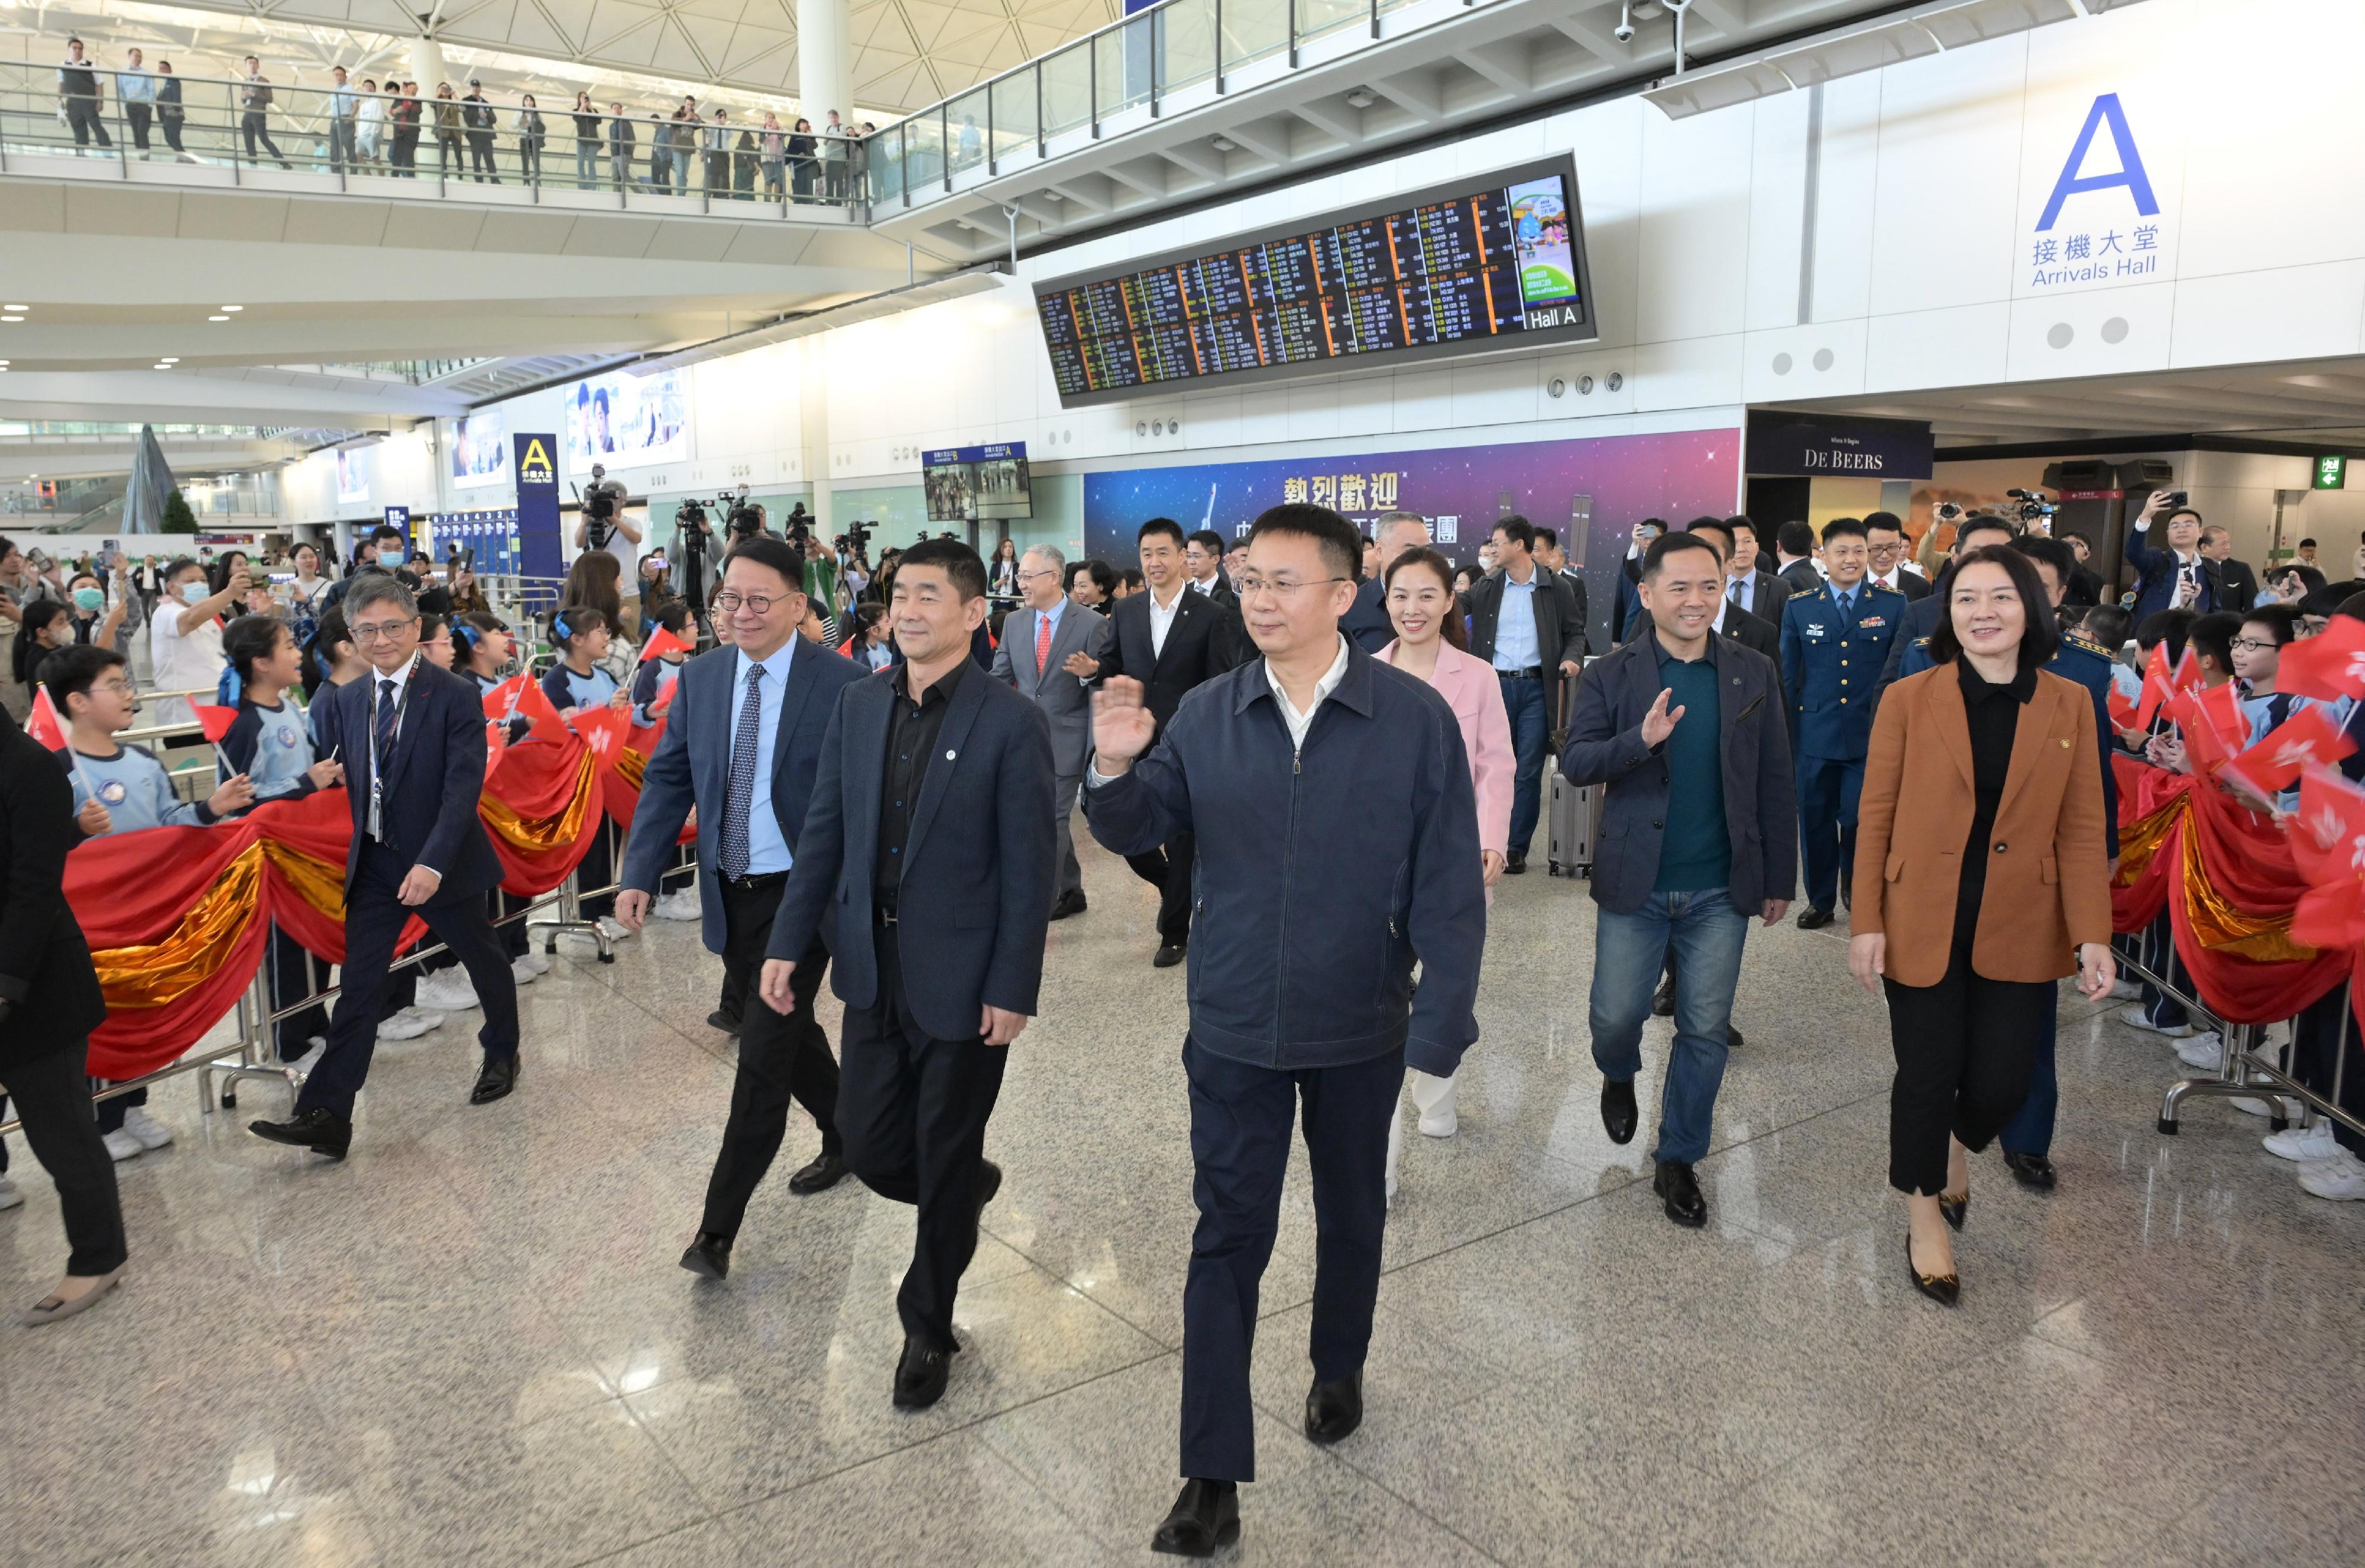 A China Manned Space delegation arrived in Hong Kong for a four-day visit today (November 28). Photo shows the Chief Secretary for Administration, Mr Chan Kwok-ki (second left), greeting the delegation members at Hong Kong International Airport.